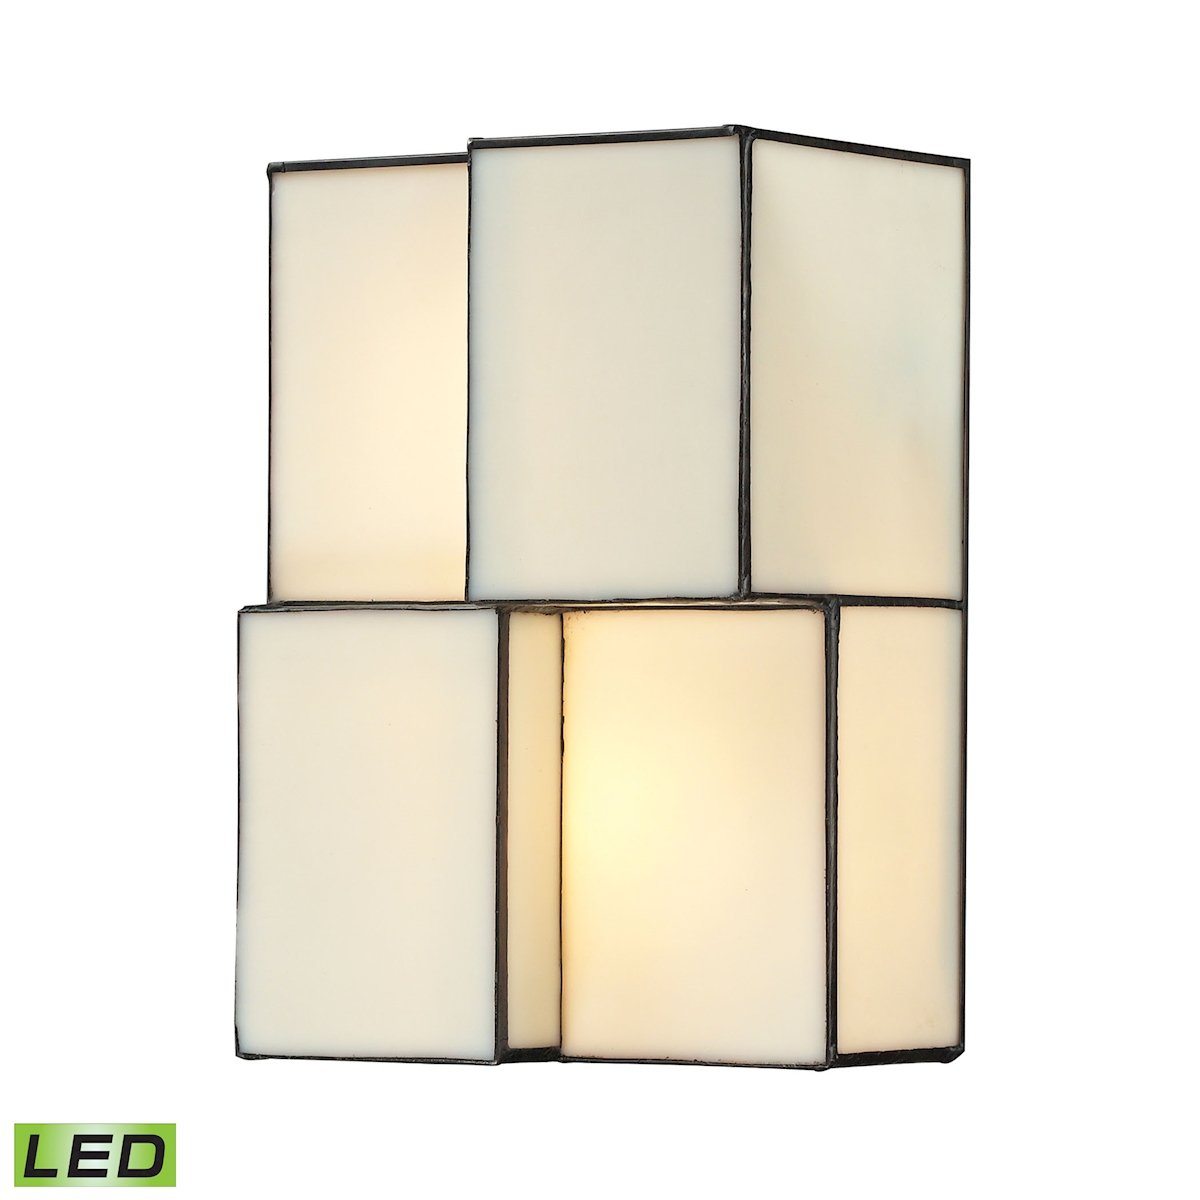 Cubist 2 Light LED Wall Sconce In Brushed Nickel Wall Sconce Elk Lighting 